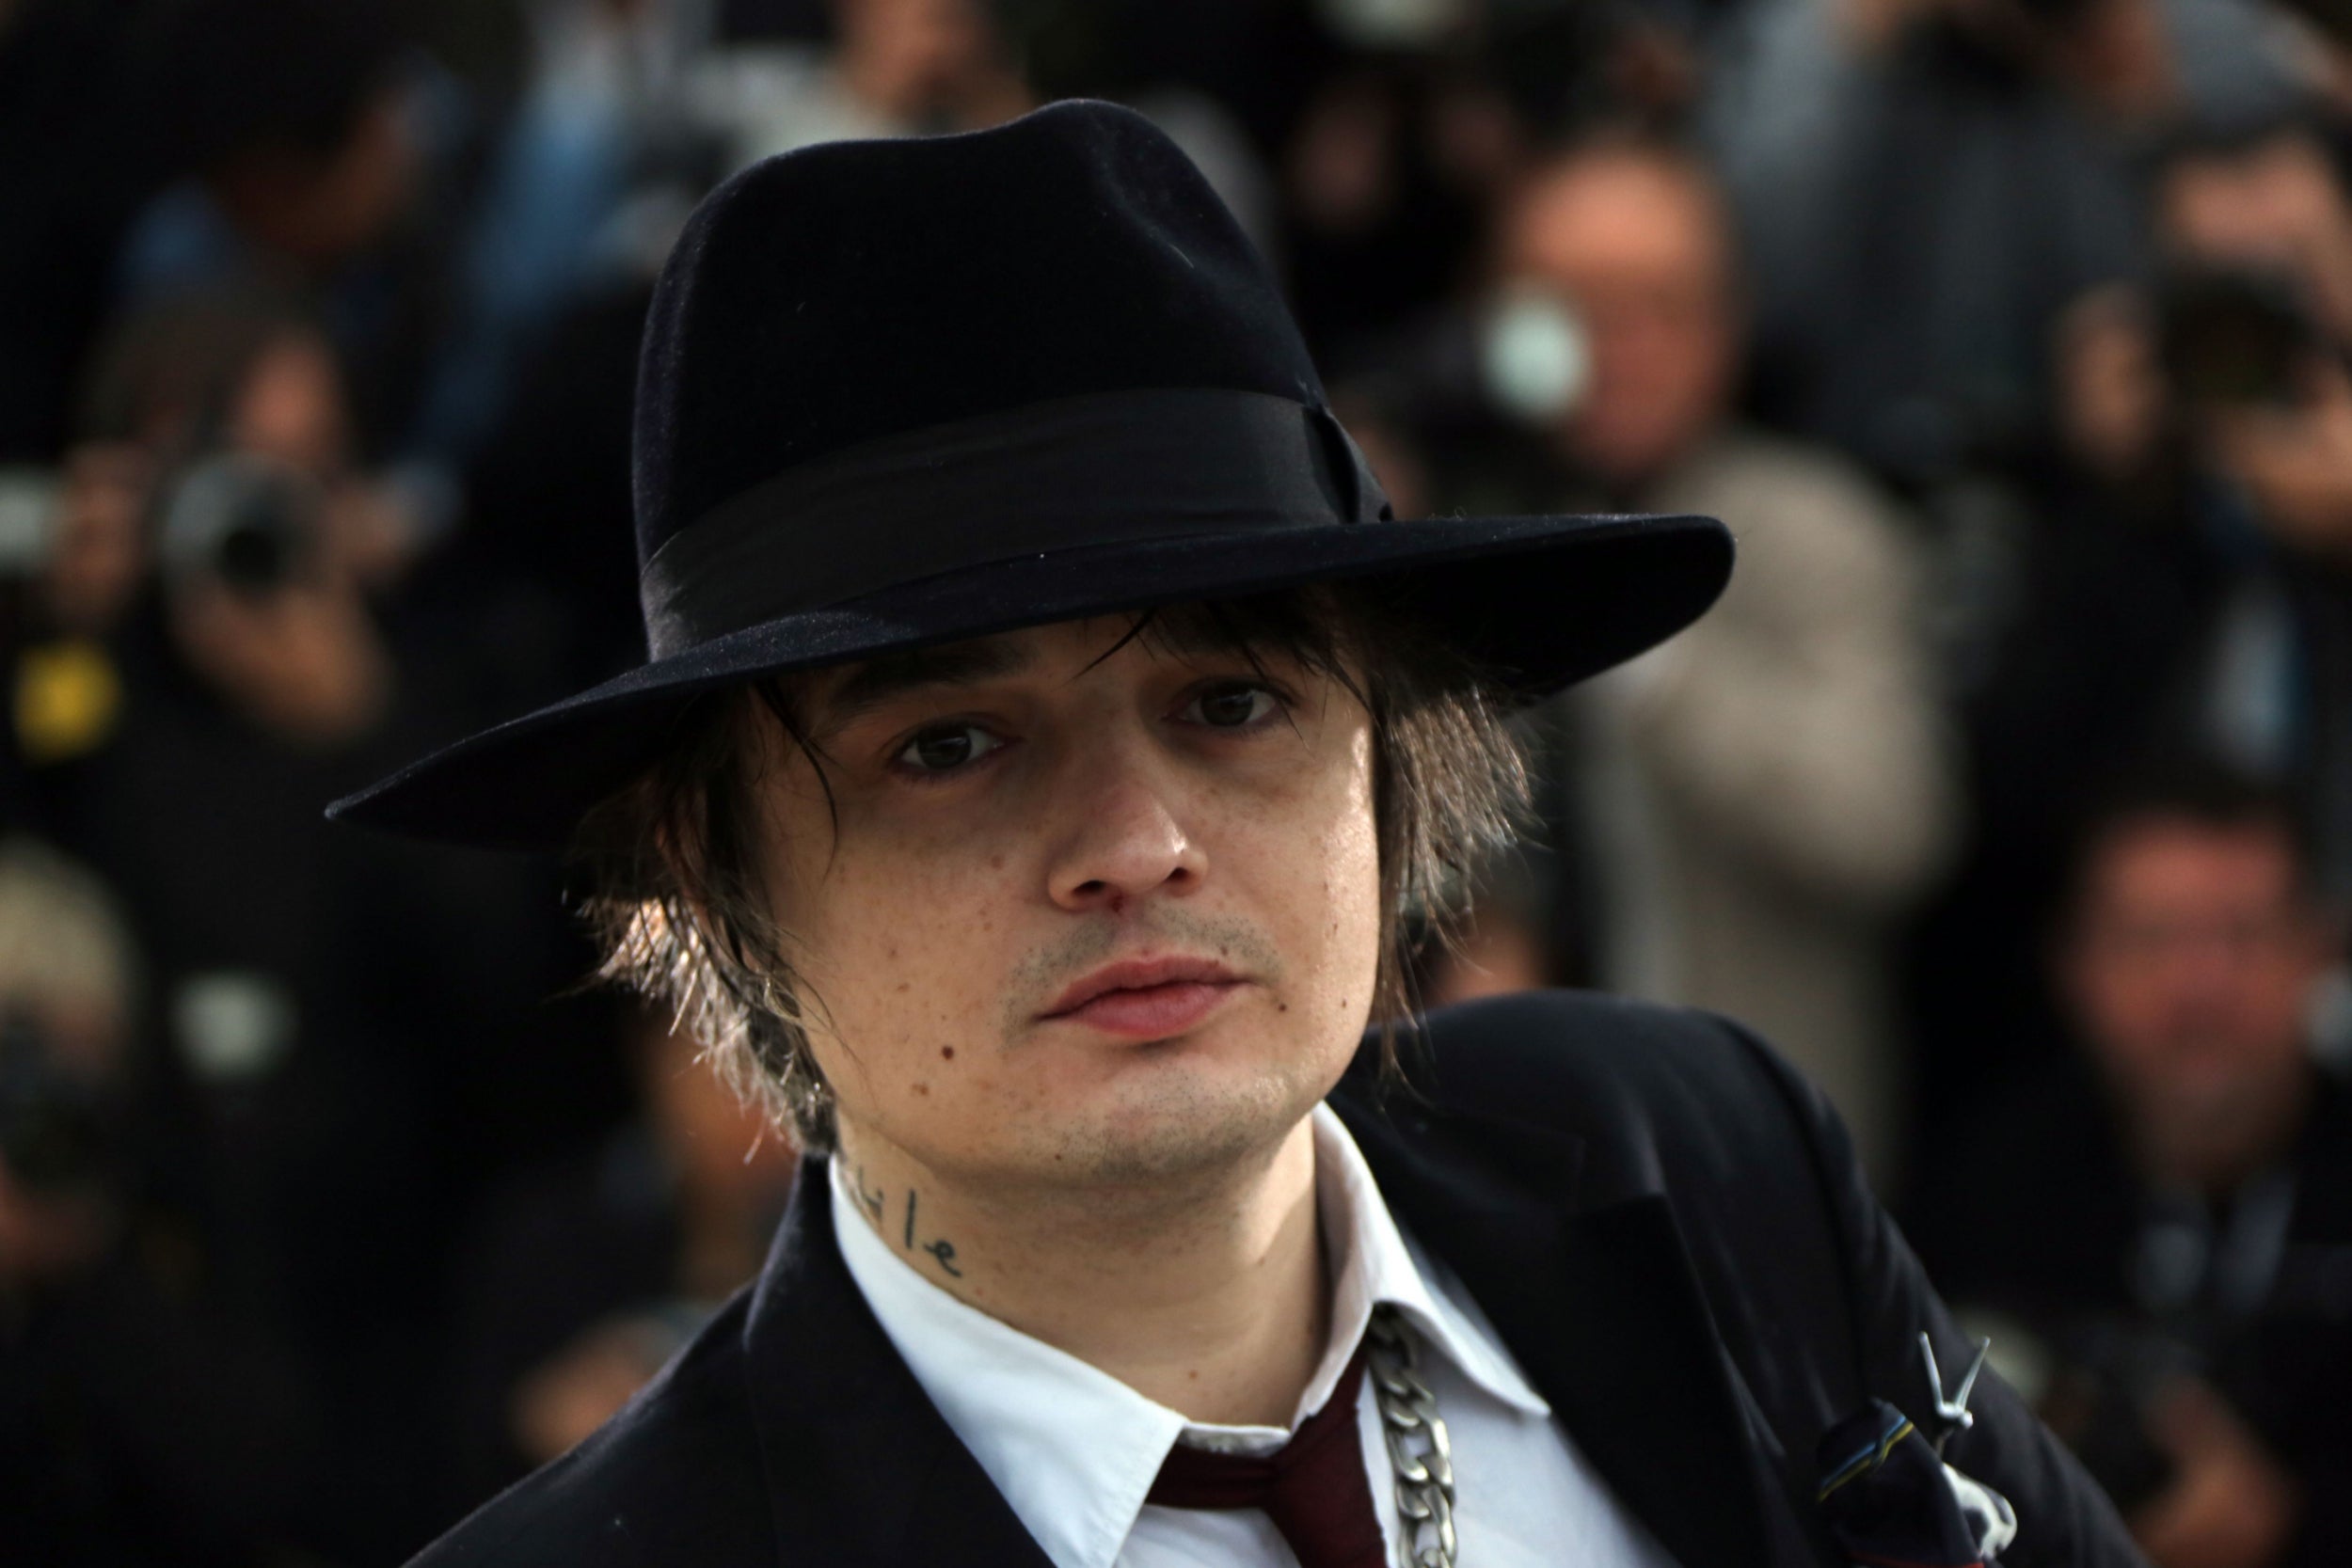 Pete Doherty was reportedly arrested soon after being released from custody over alleged drug possession